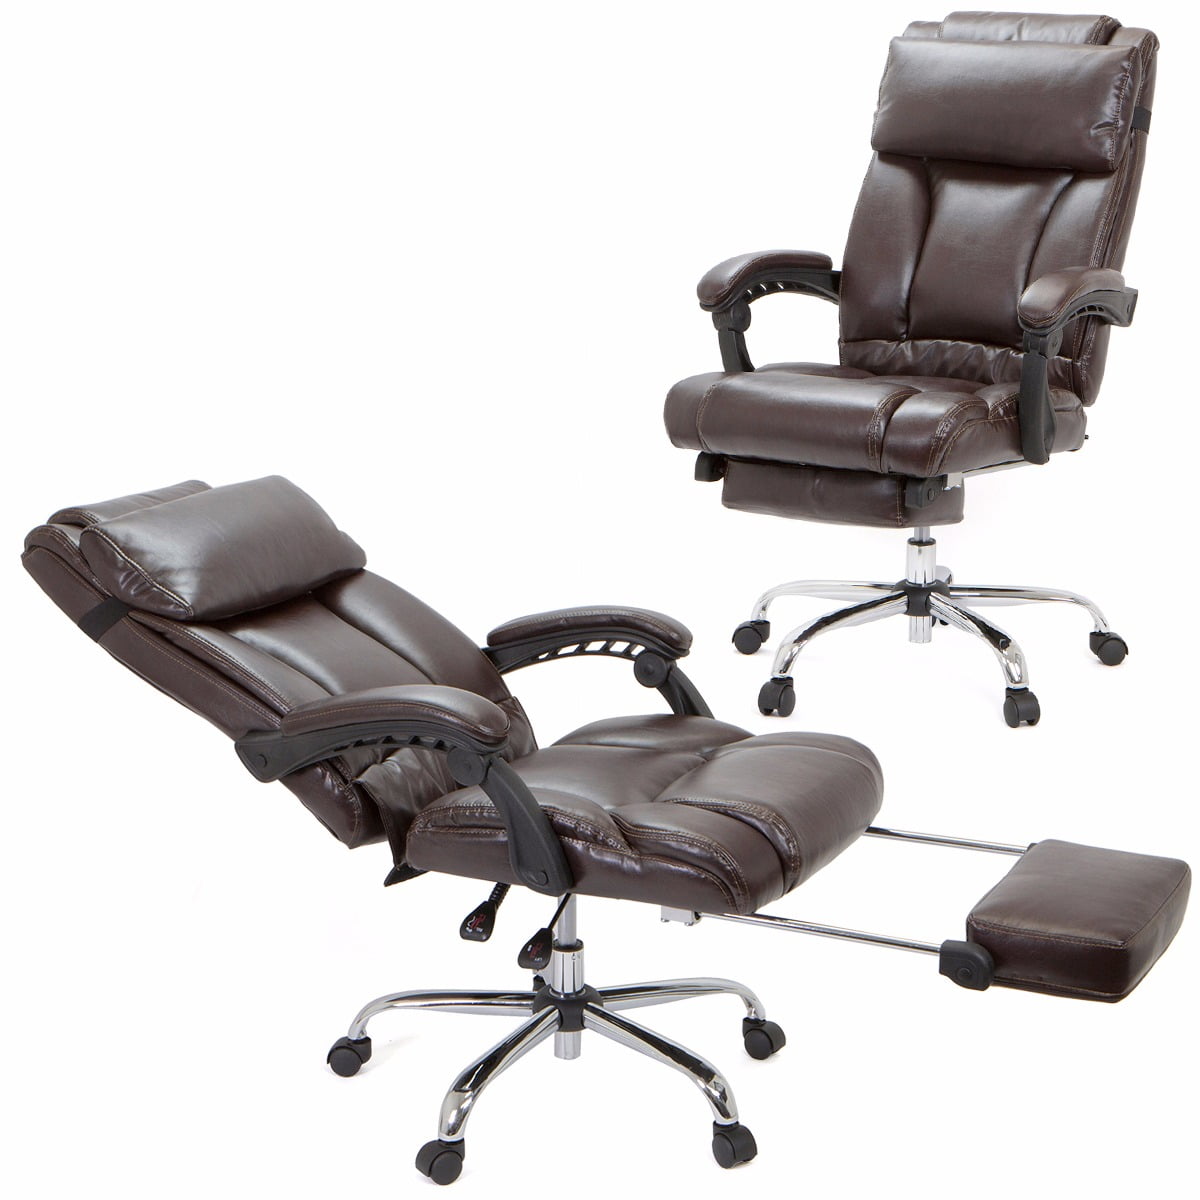 XtremepowerUS Ergonomic High Back PU Leather Office Chair with Footrest